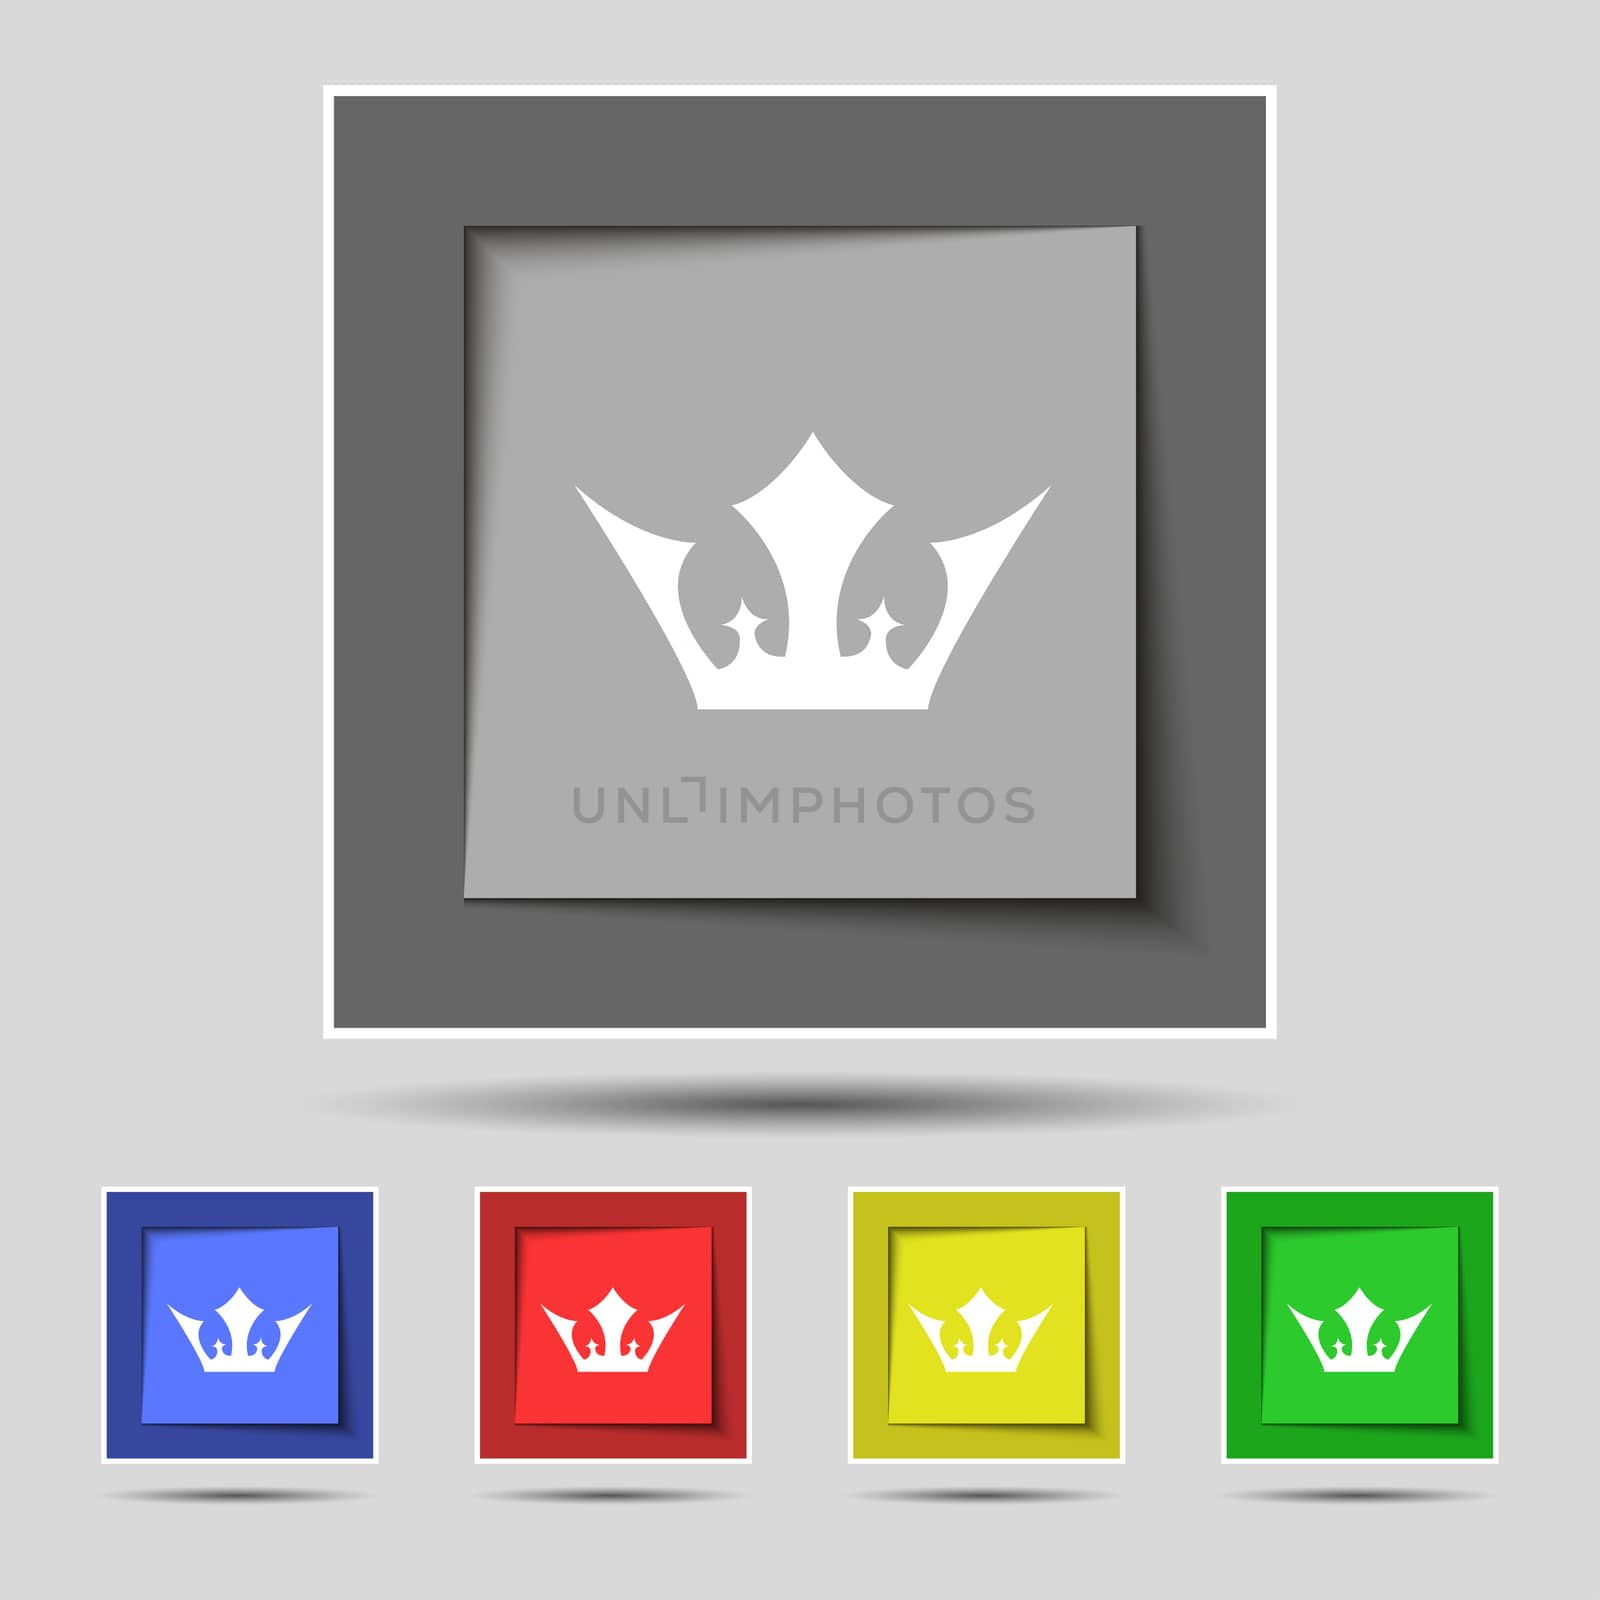 Crown icon sign on original five colored buttons. illustration